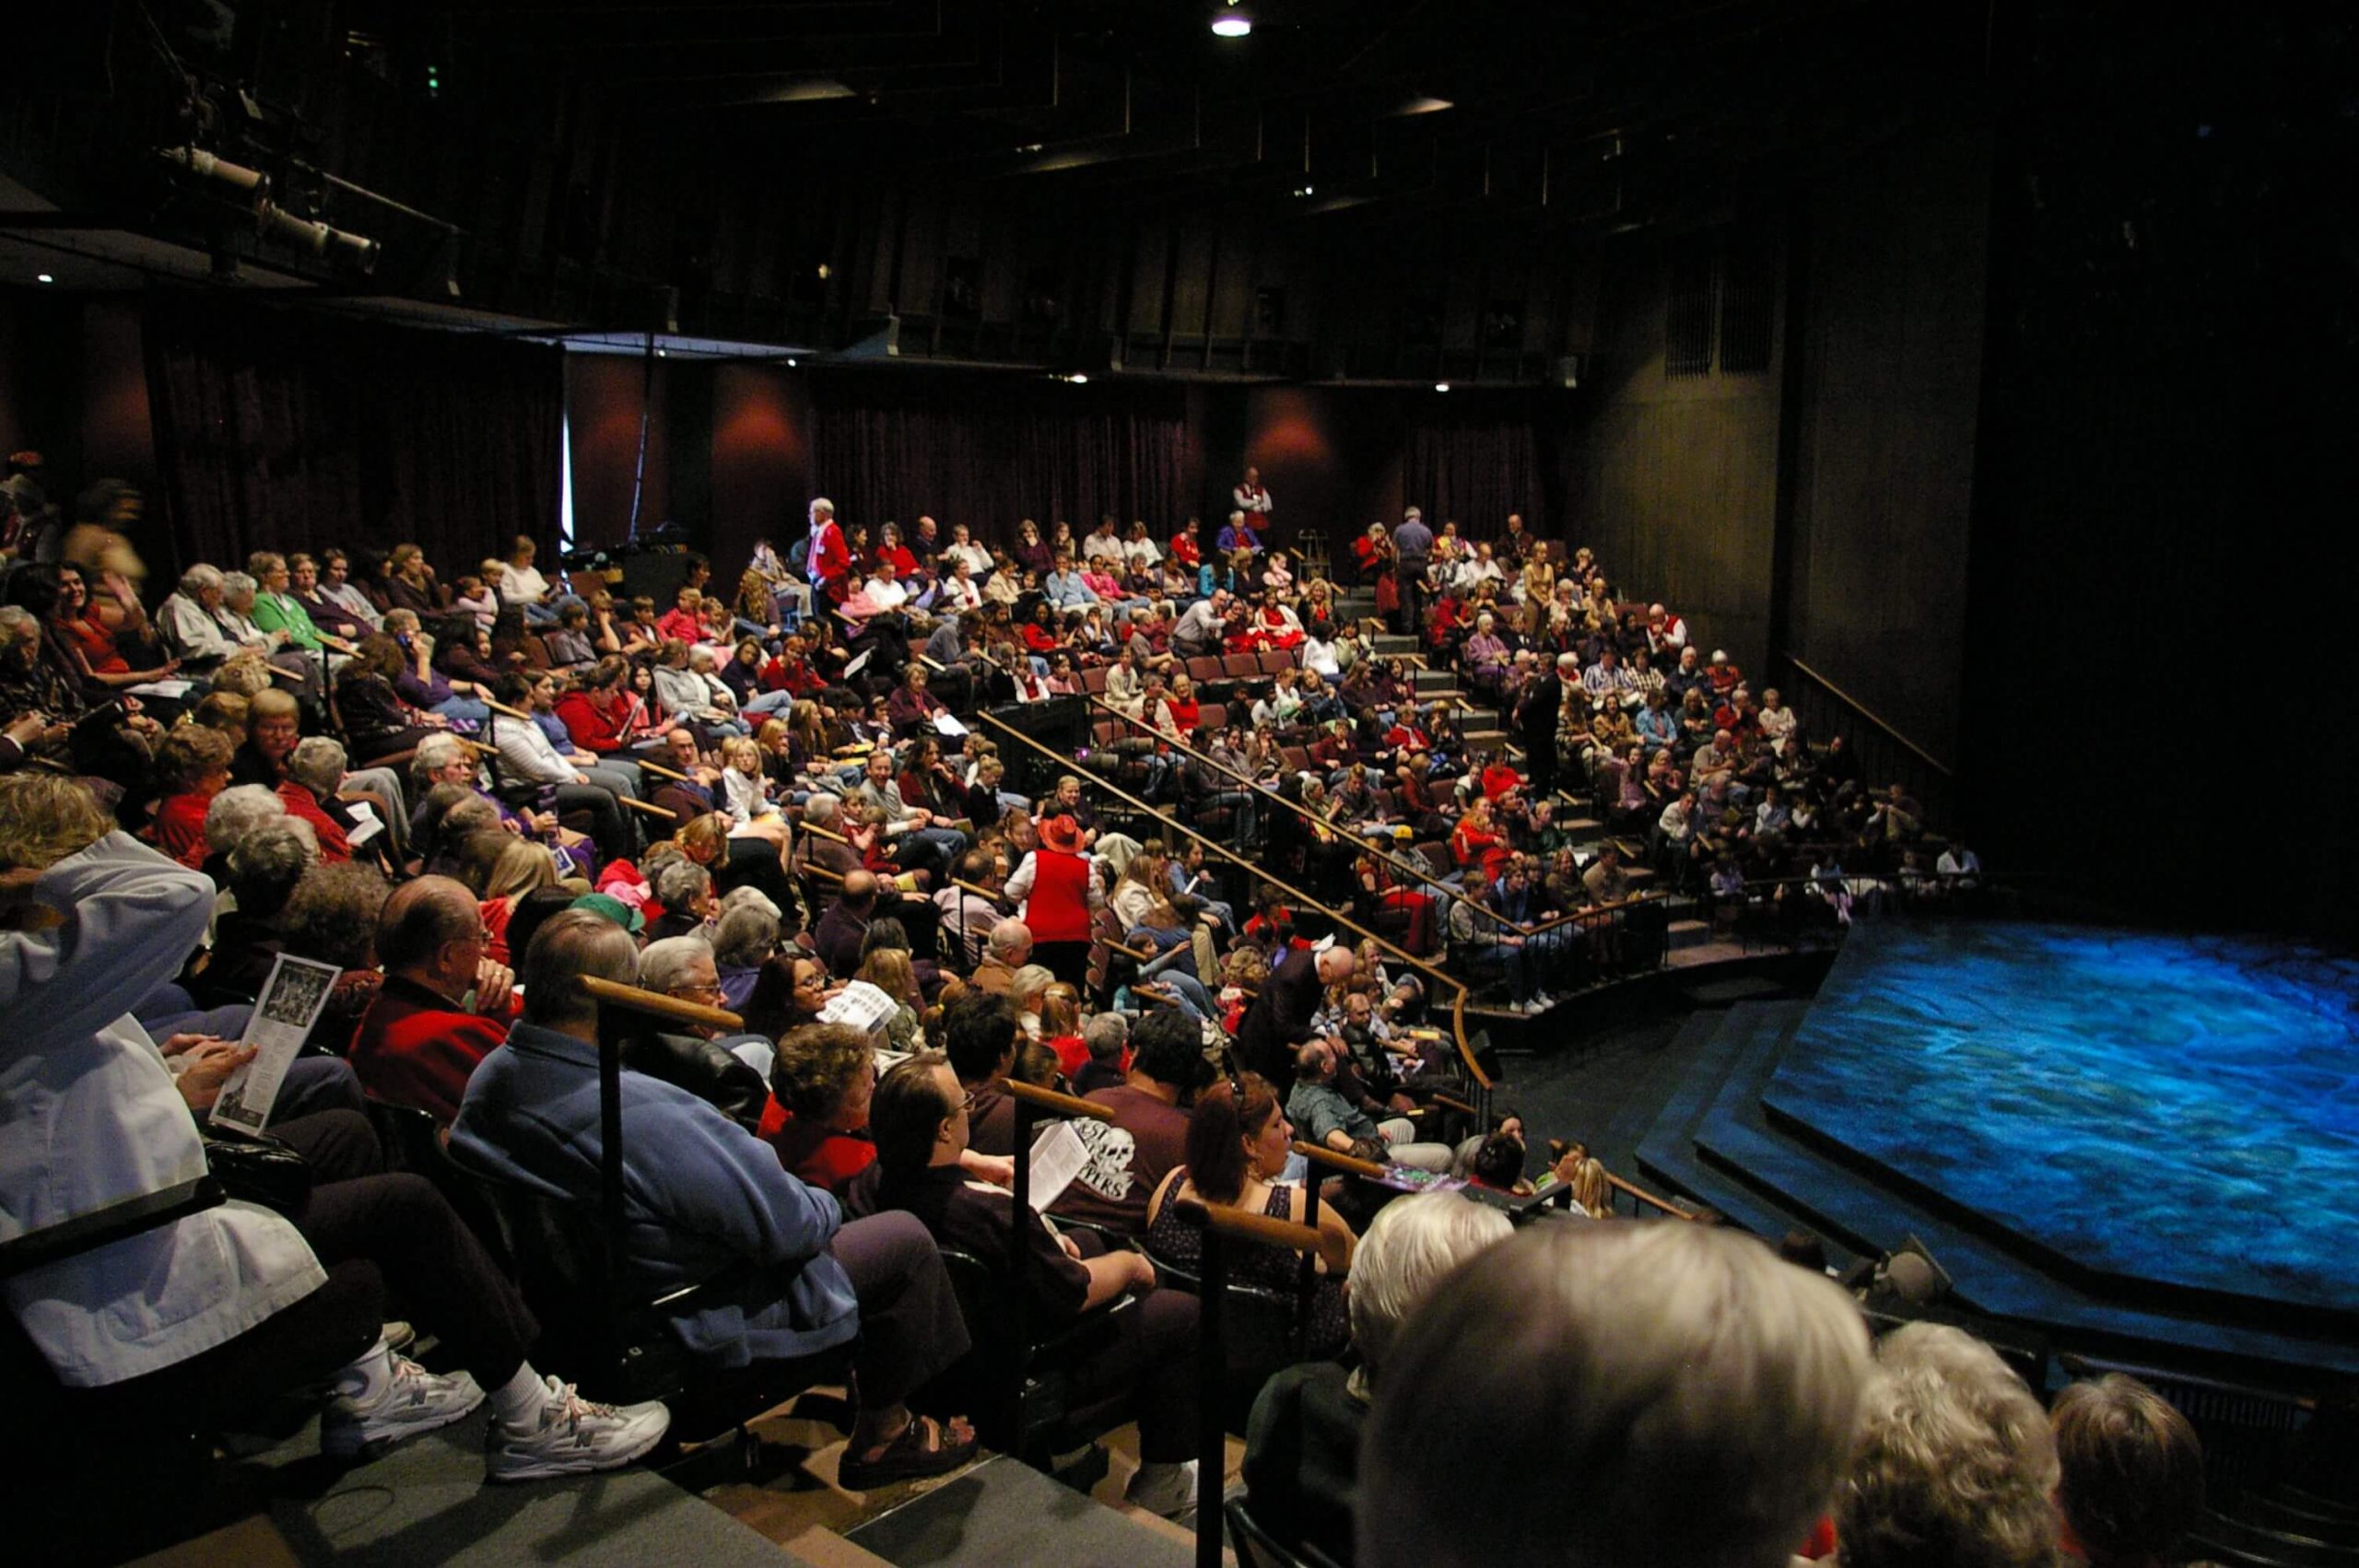 Interior photo of Marian Theatre with patrons in seats